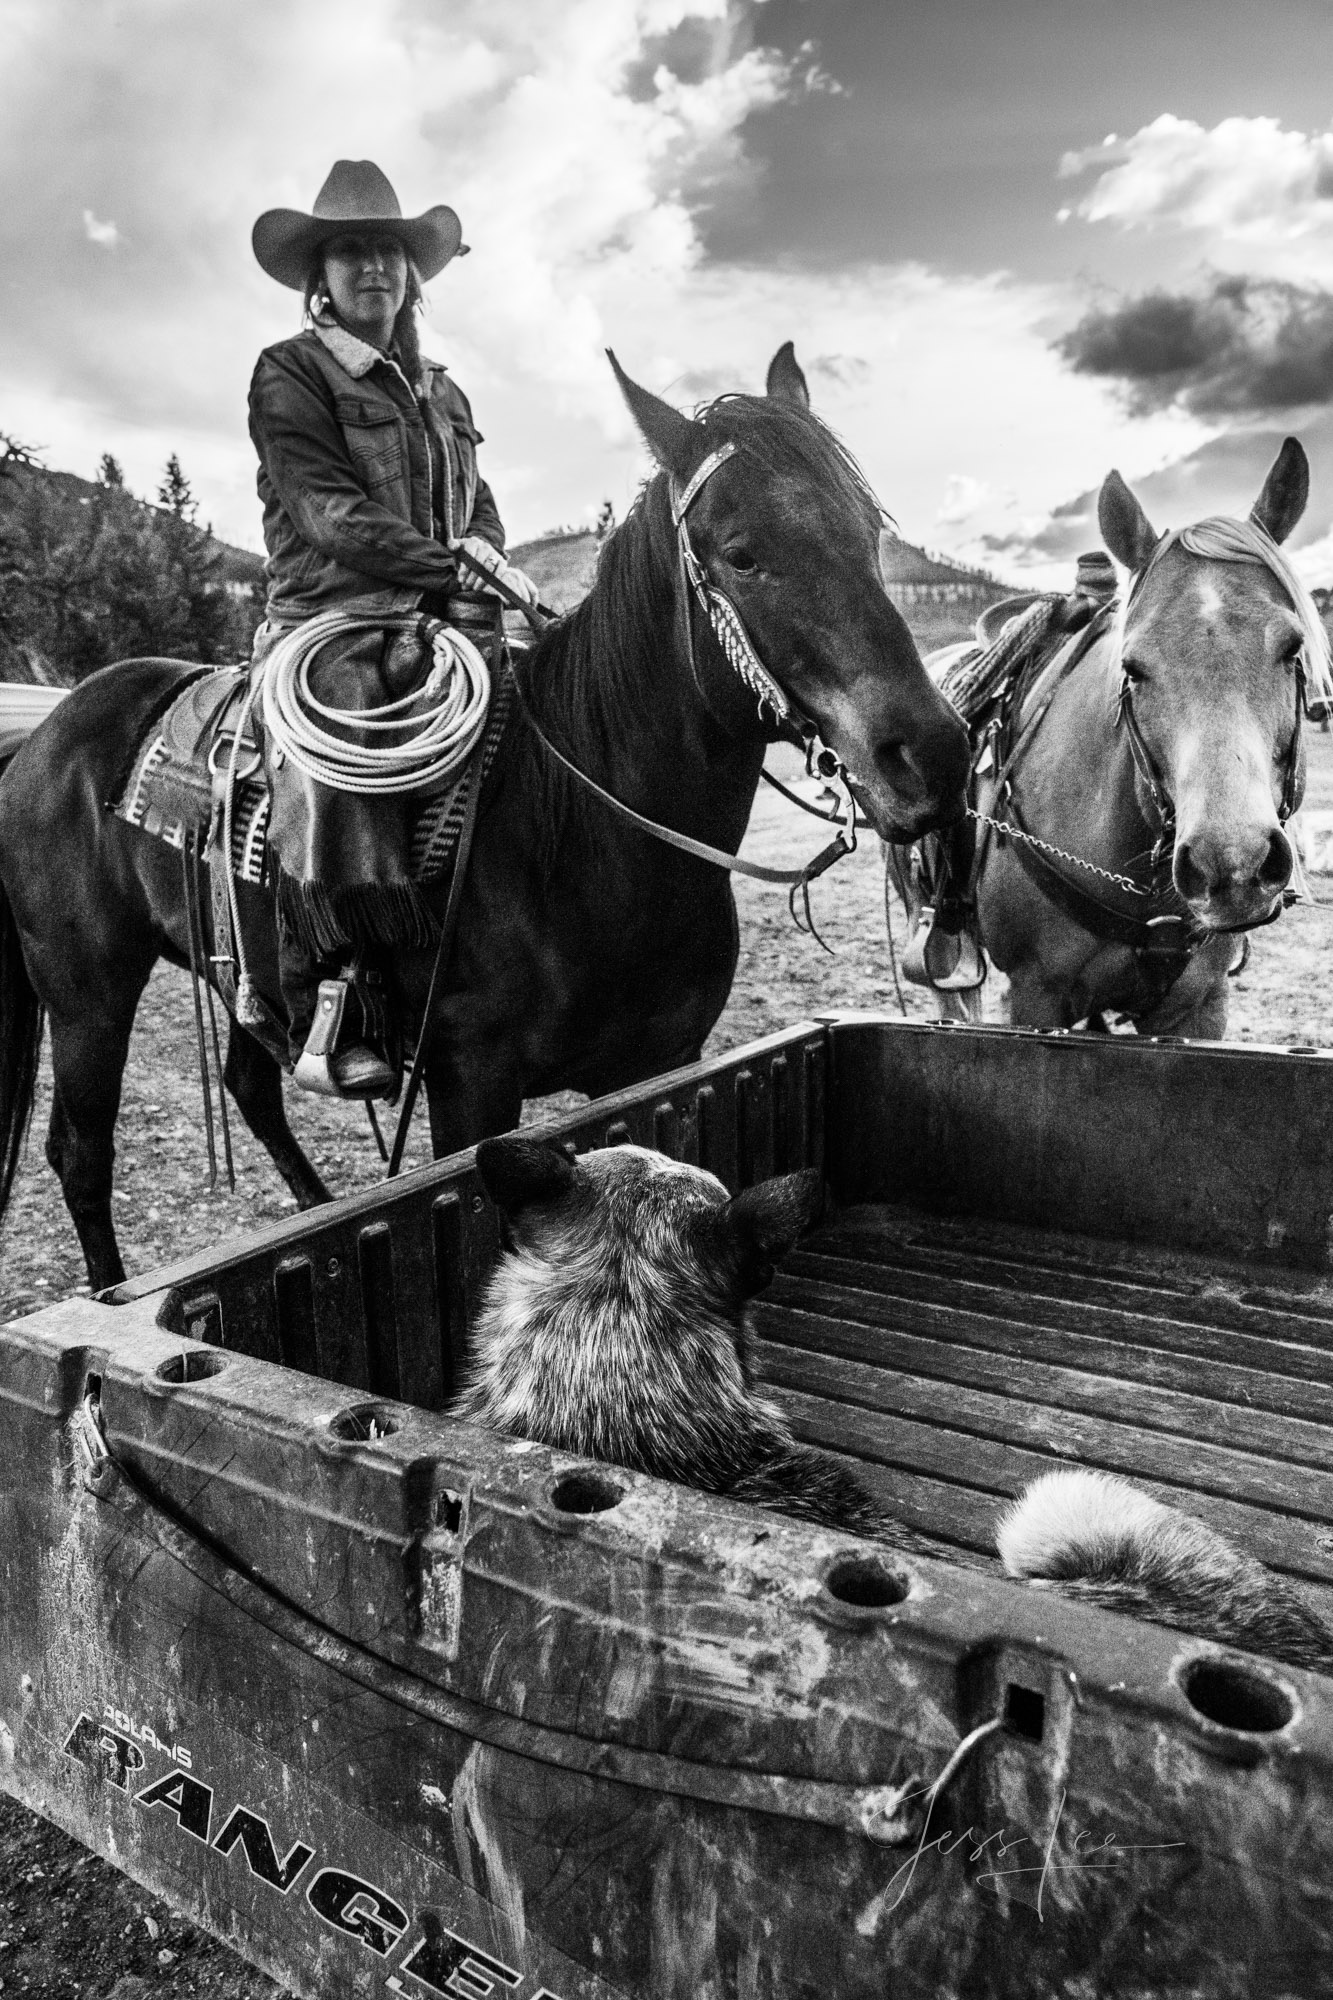 Fine Art Limited Edition Photo Prints of Cowboys, Horses, and life in the West. Easy Riding', a Cowboy picture in black and white...